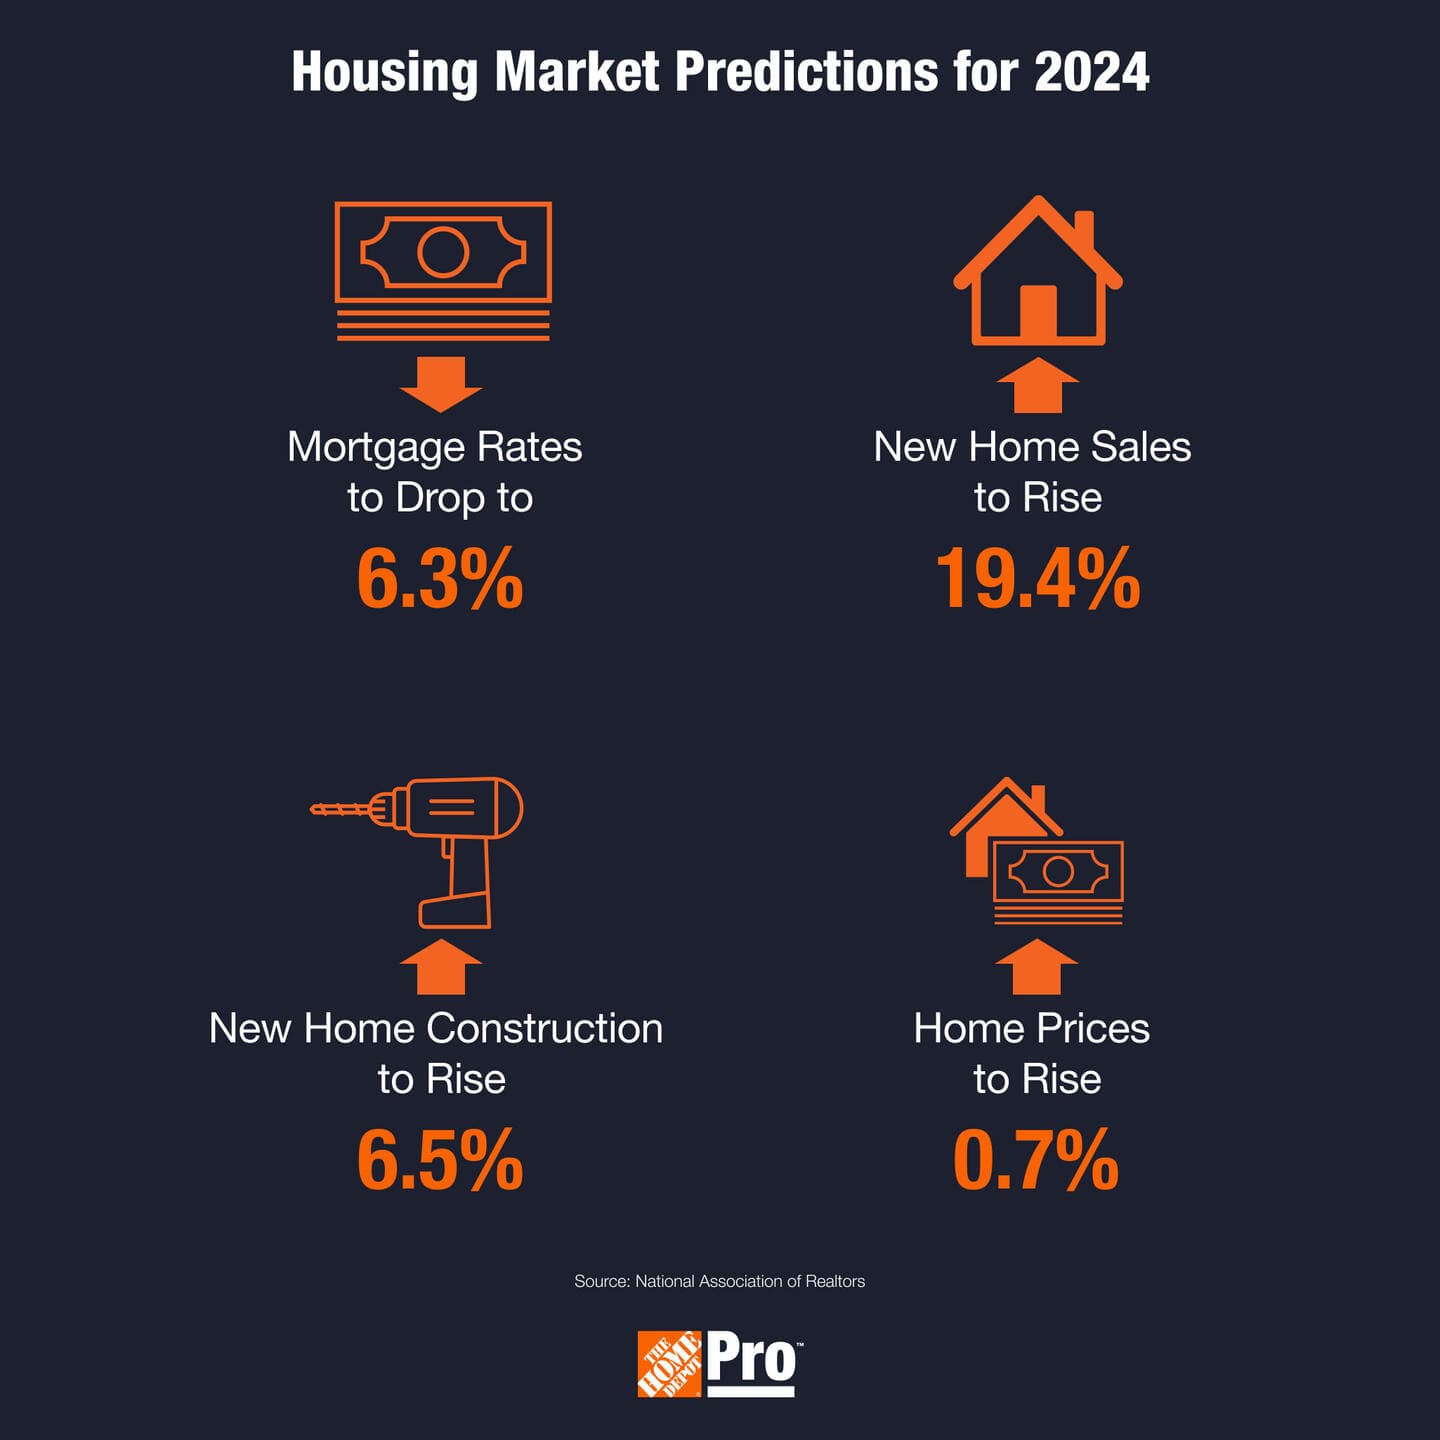 A graphic shows major housing market predictions for 2024.